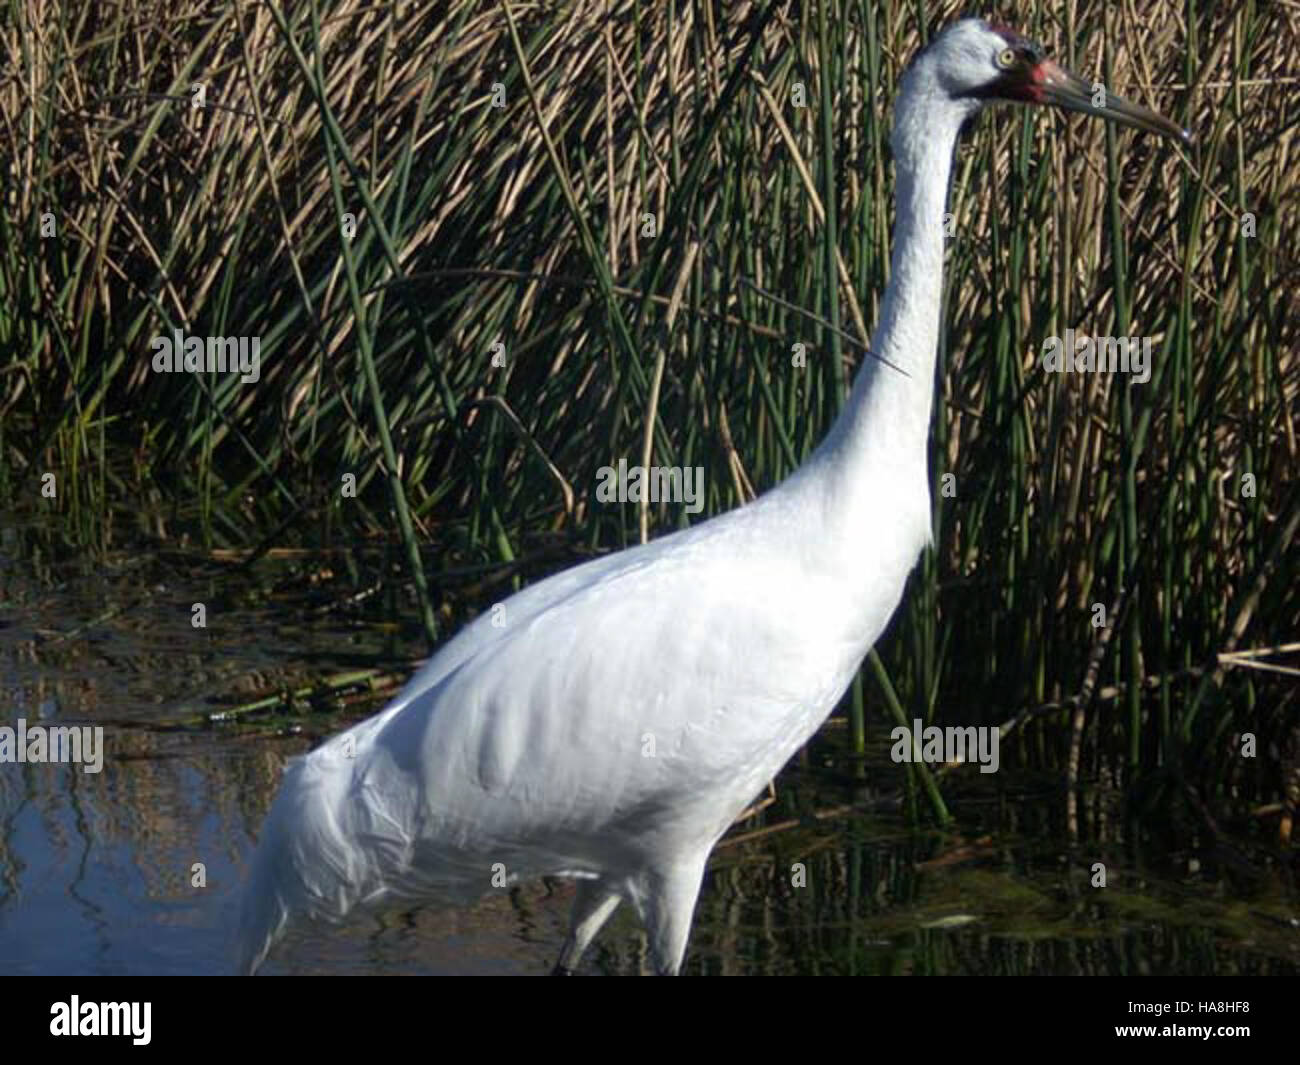 usfwsmidwest 5534954534 Adult Whooping Crane Stock Photo